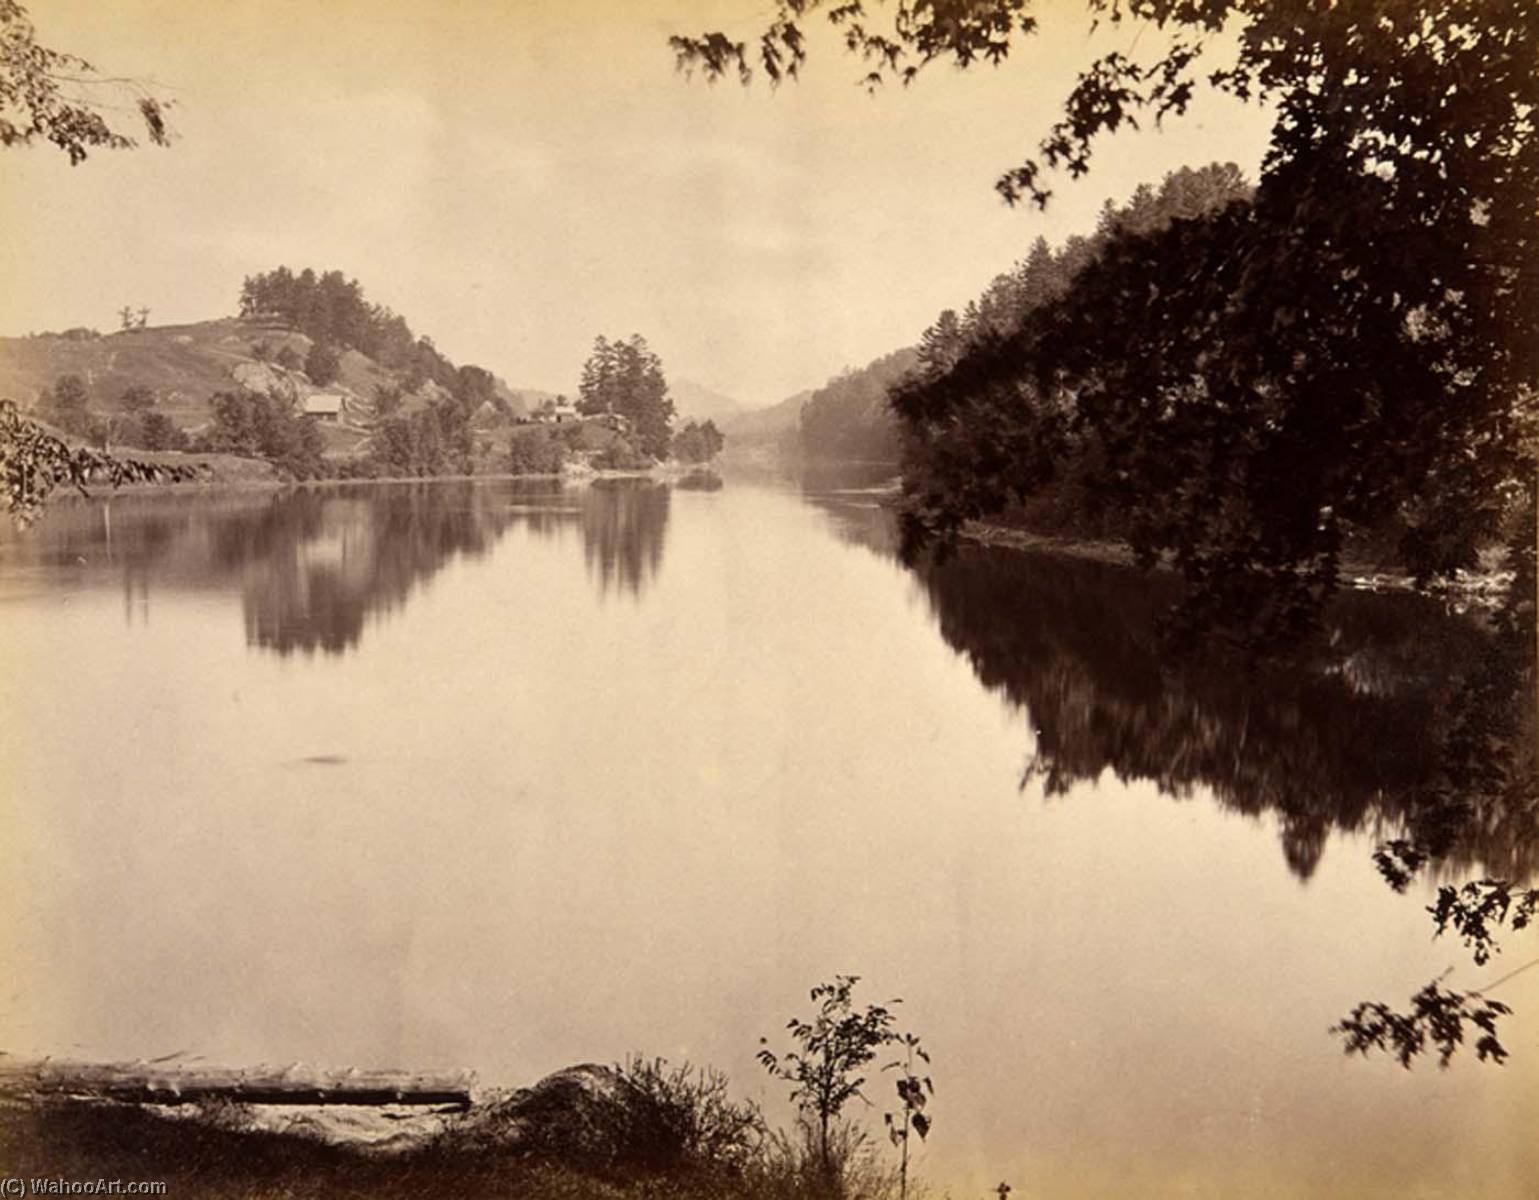 WikiOO.org - 백과 사전 - 회화, 삽화 Gotthelf Pach - Connecticut River, from the album Views of Charlestown, New Hampshire